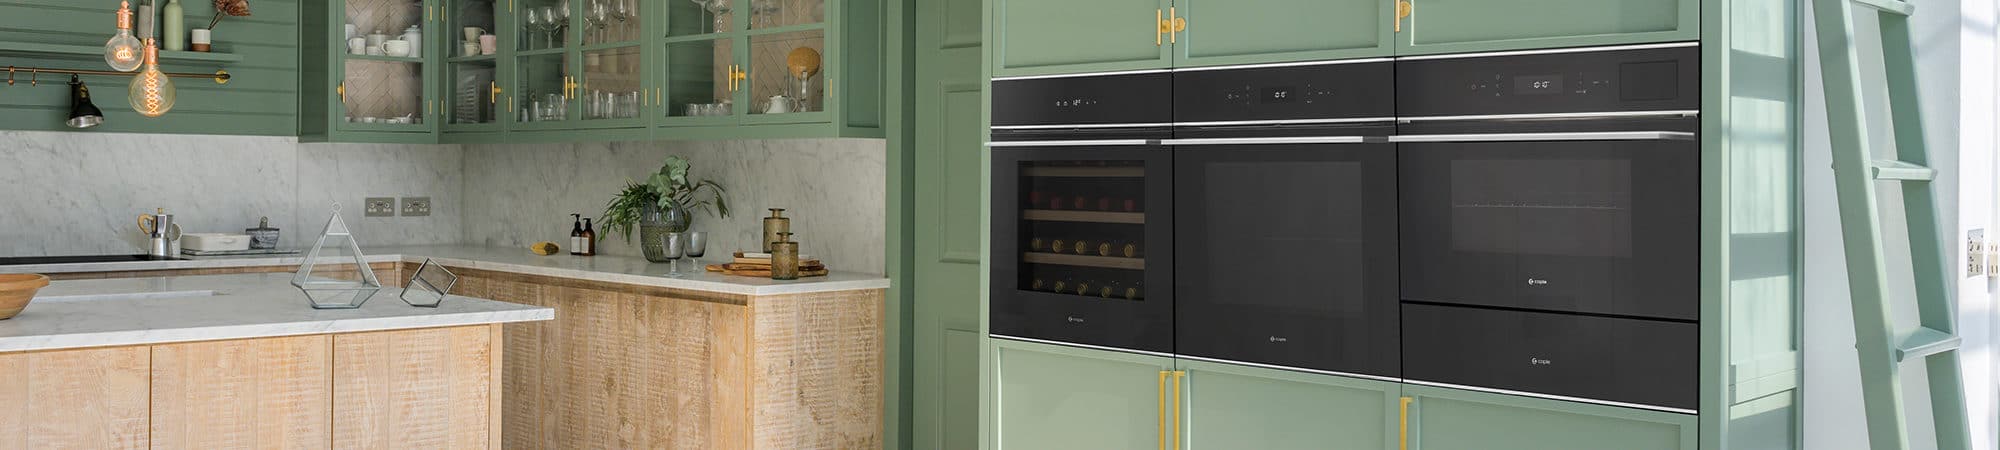 Black glass wine cabinet, single oven and microwave